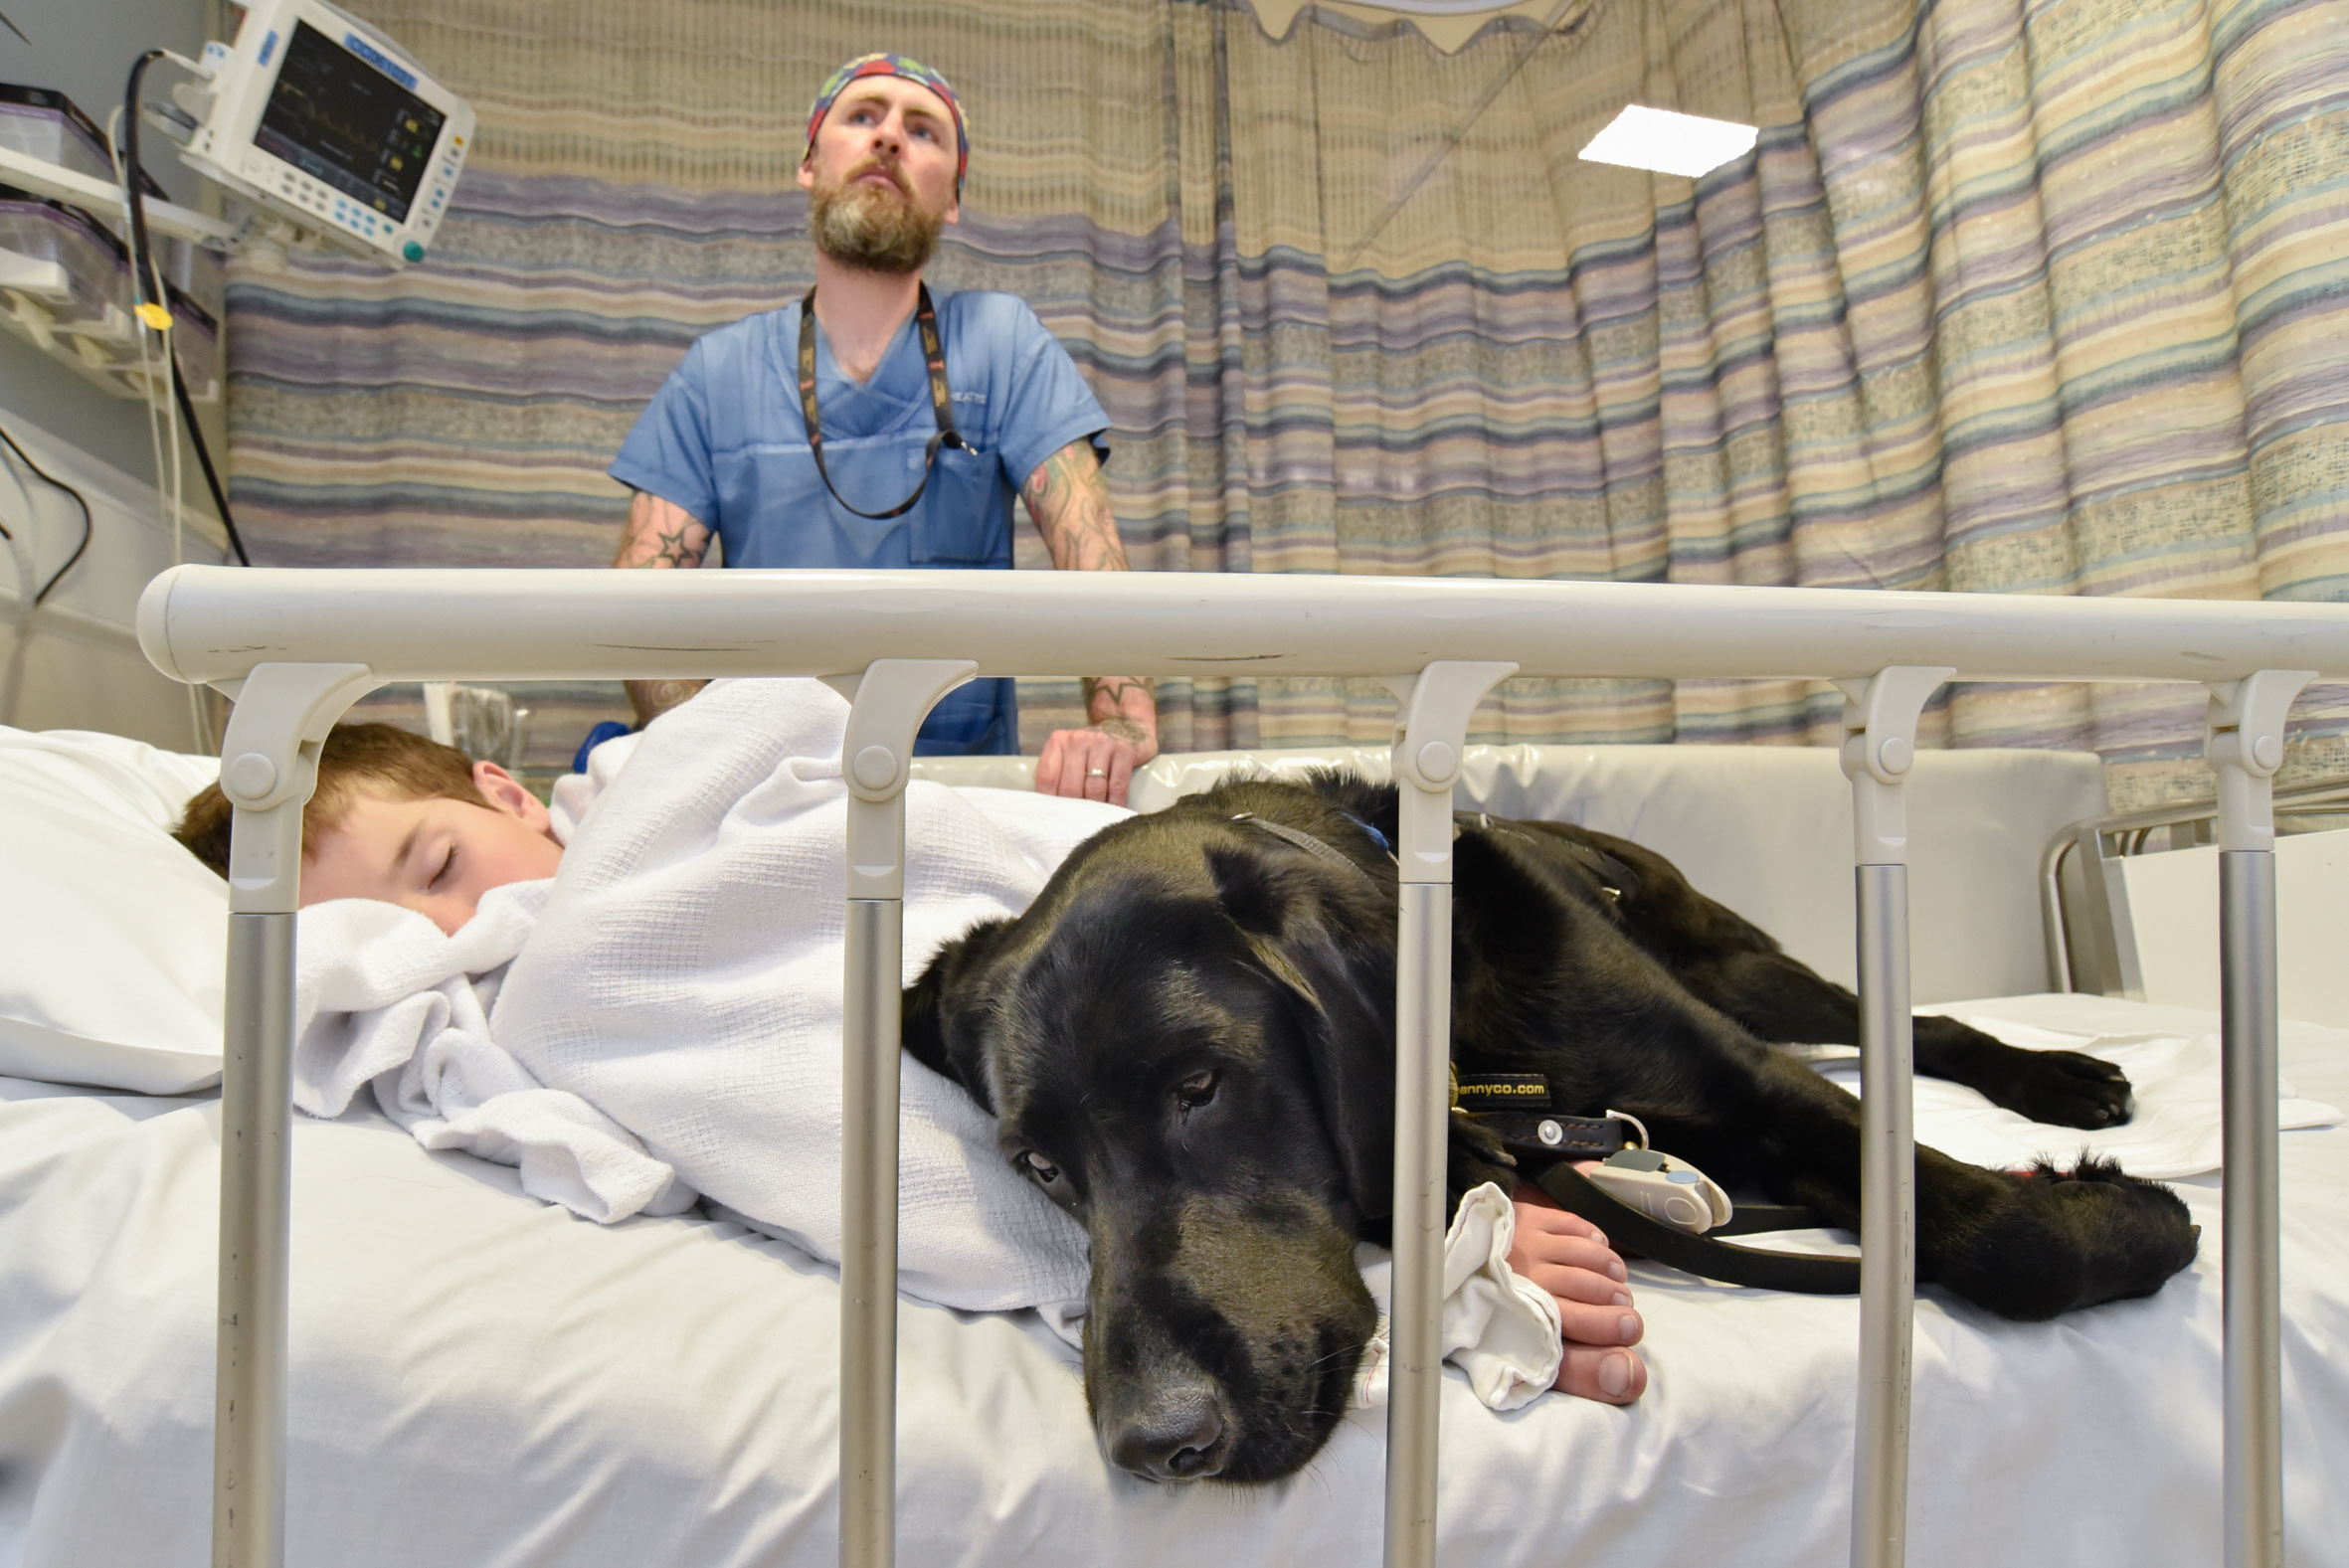 PHOTO: Mahe, an assistance dog, accompanied 9-year-old James Isaac at Wellington Children's Hospital in New Zealand, where he underwent an MRI scan to diagnose the cause of his seizures. 